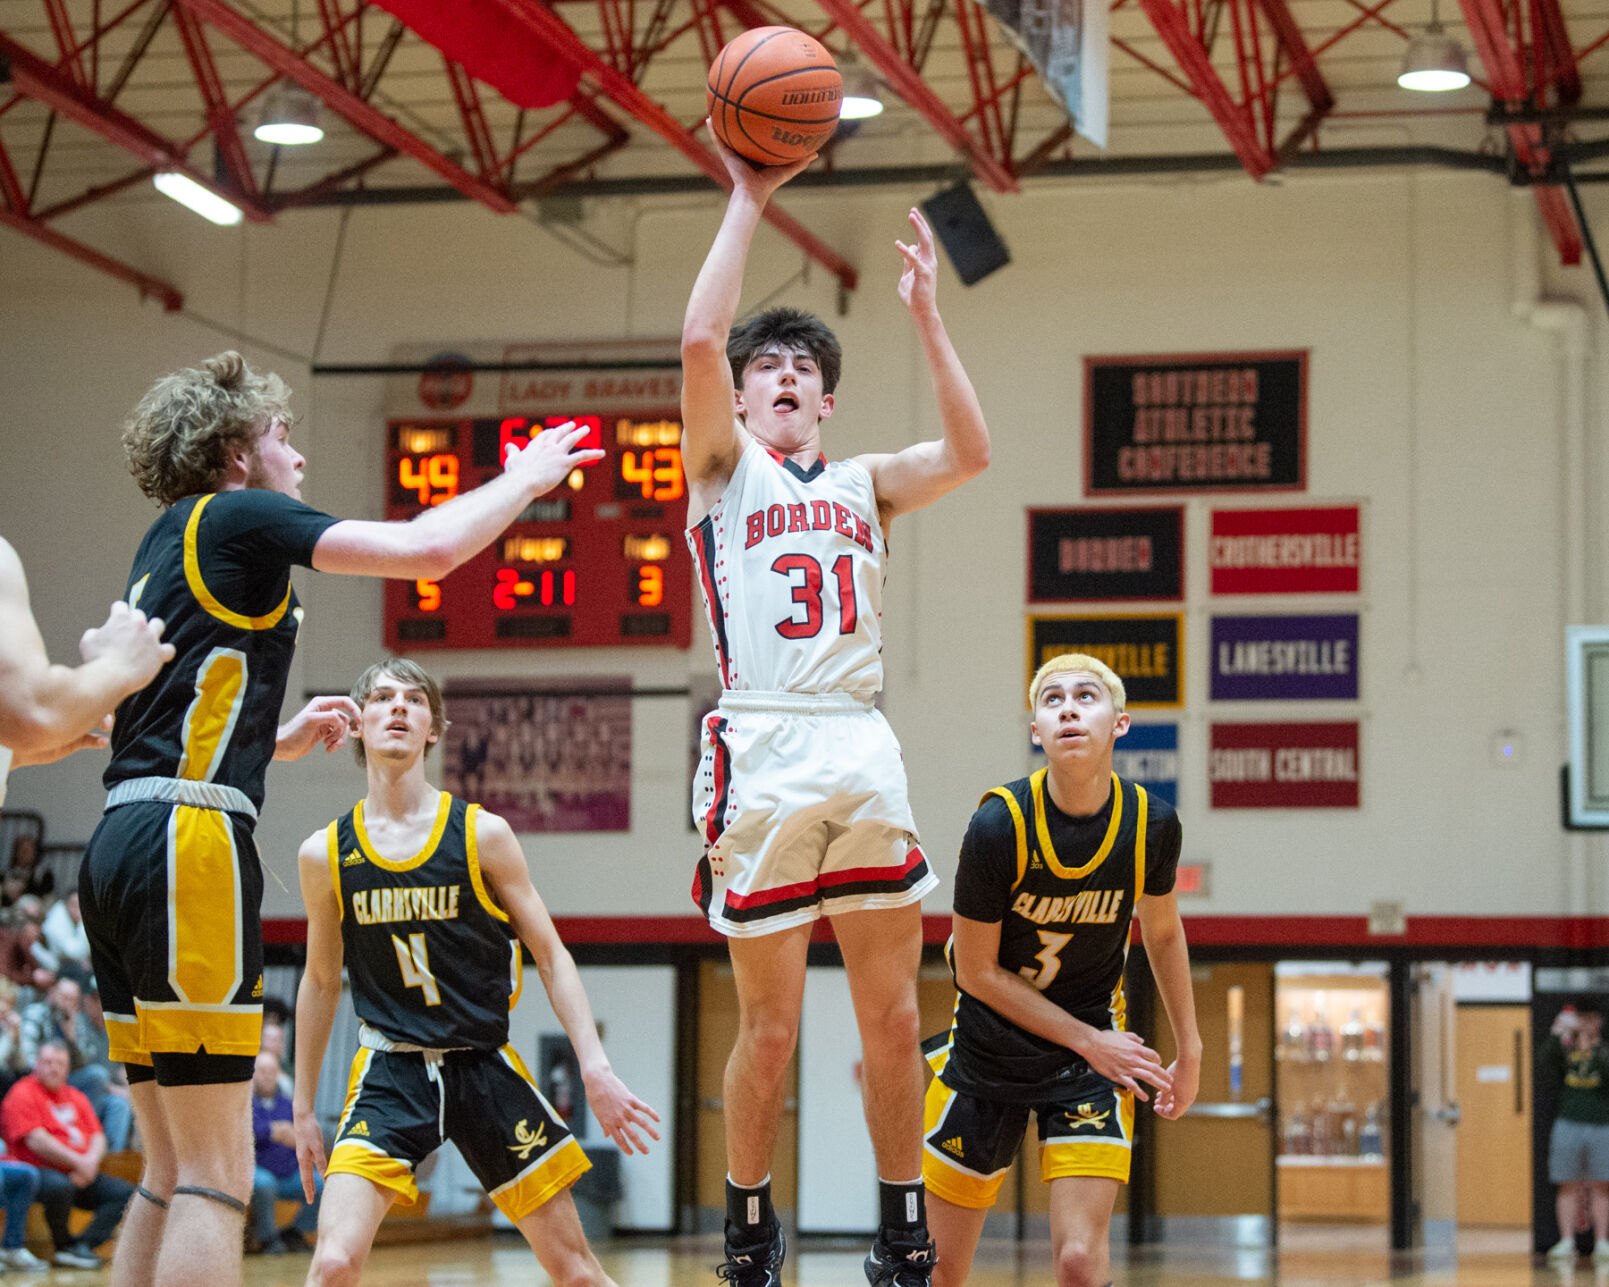 Borden’s Dominating Win in Edinburgh’s Holiday Classic with Judd Missi Scoring 20 Points